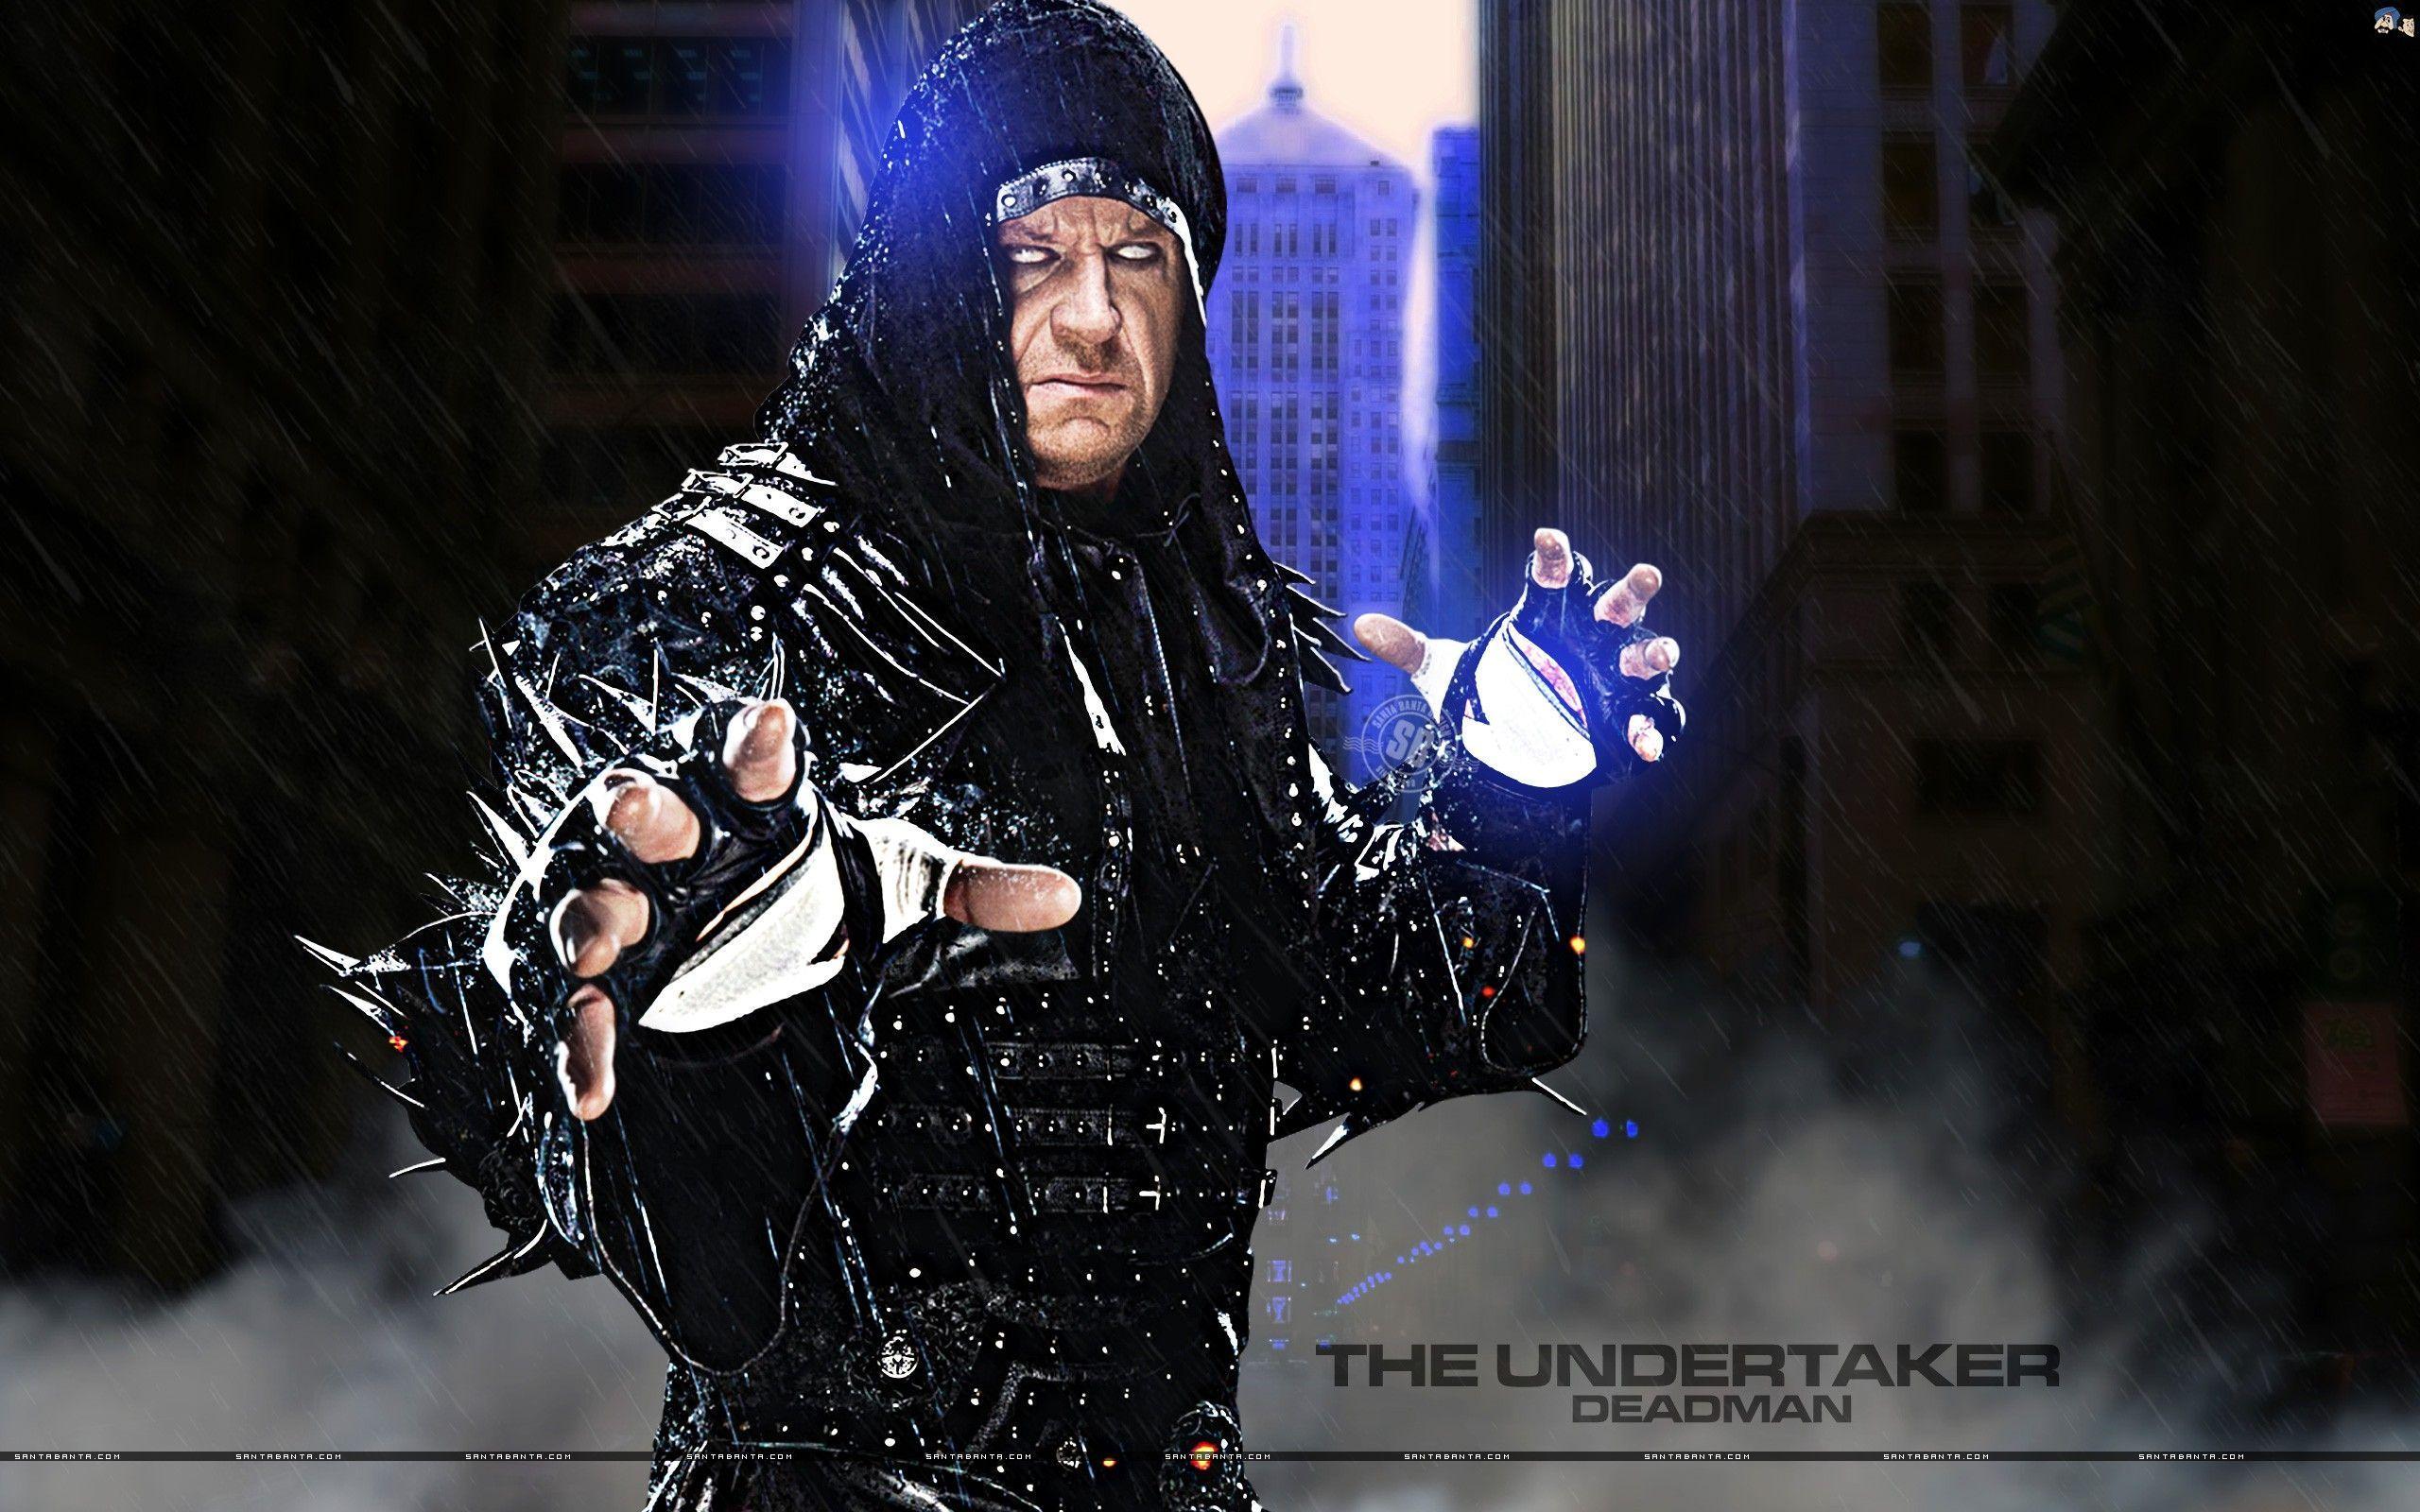 image For > The Undertaker Wallpaper 2014